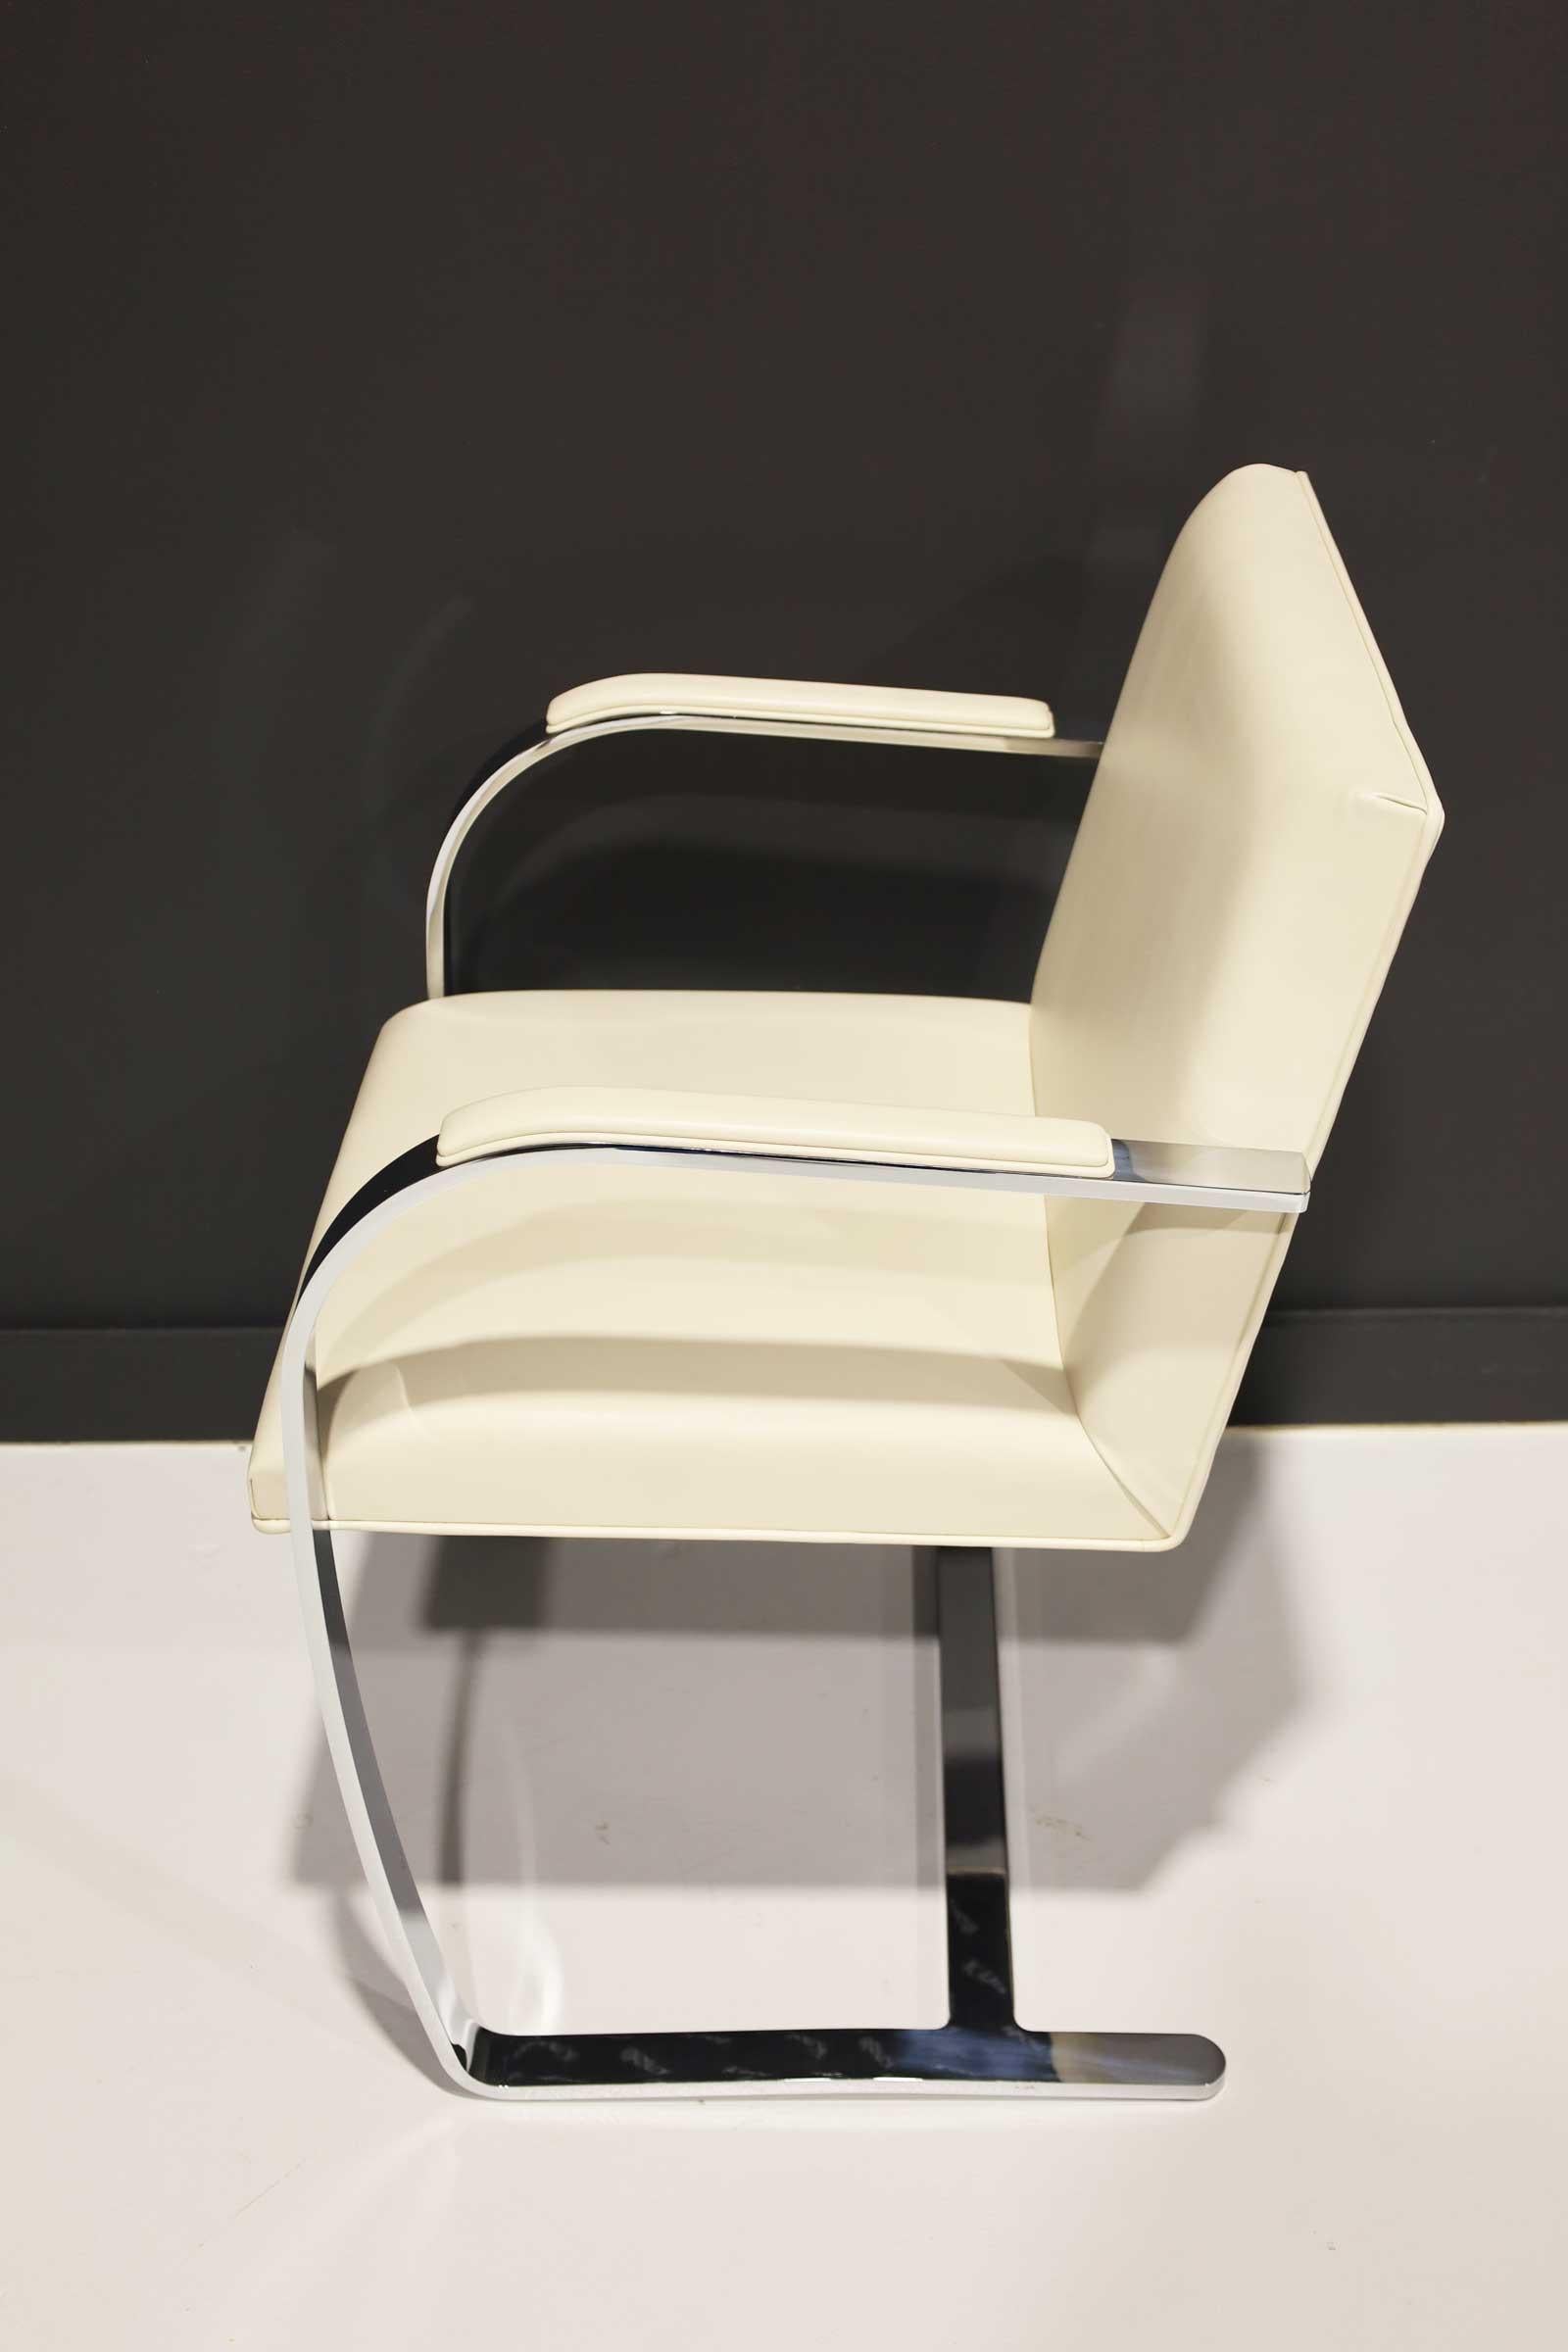 Mies van der Rohe Stainless Steel Brno Chairs by Knoll in Sabrina Leather 2